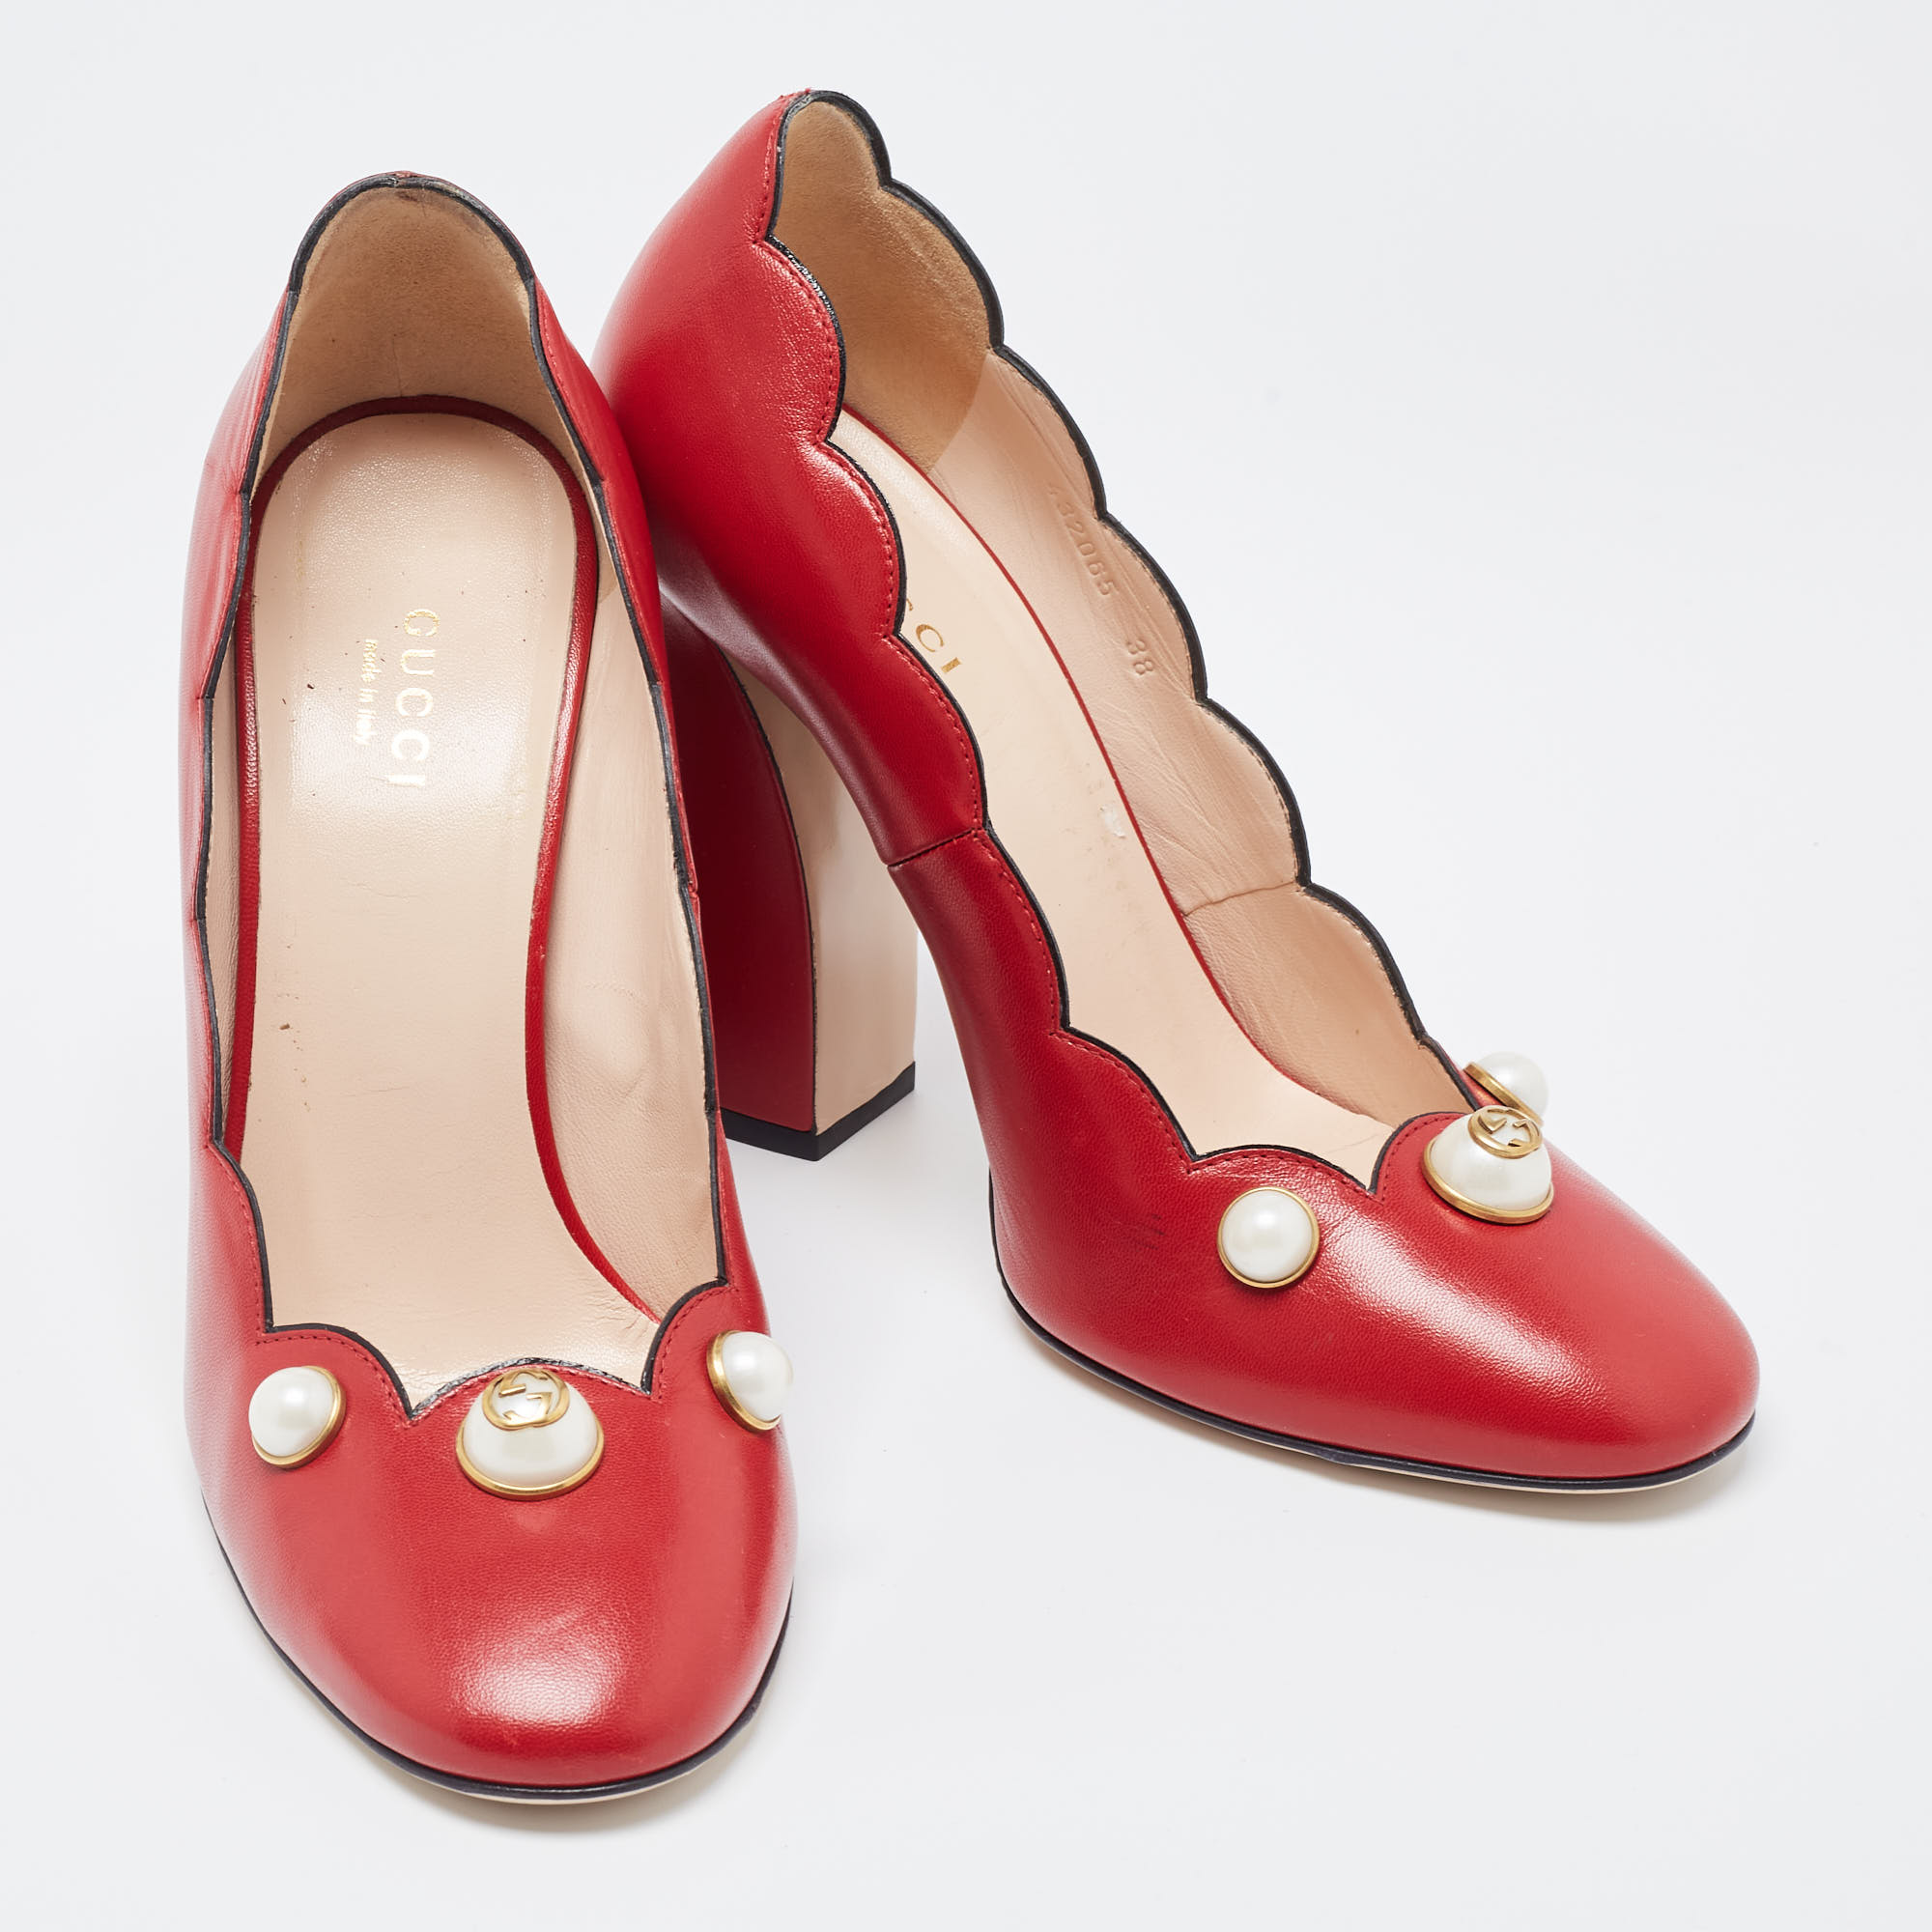 Gucci Red Leather Scalloped Willow Pearl Embellished Block Heel Pumps Size 38